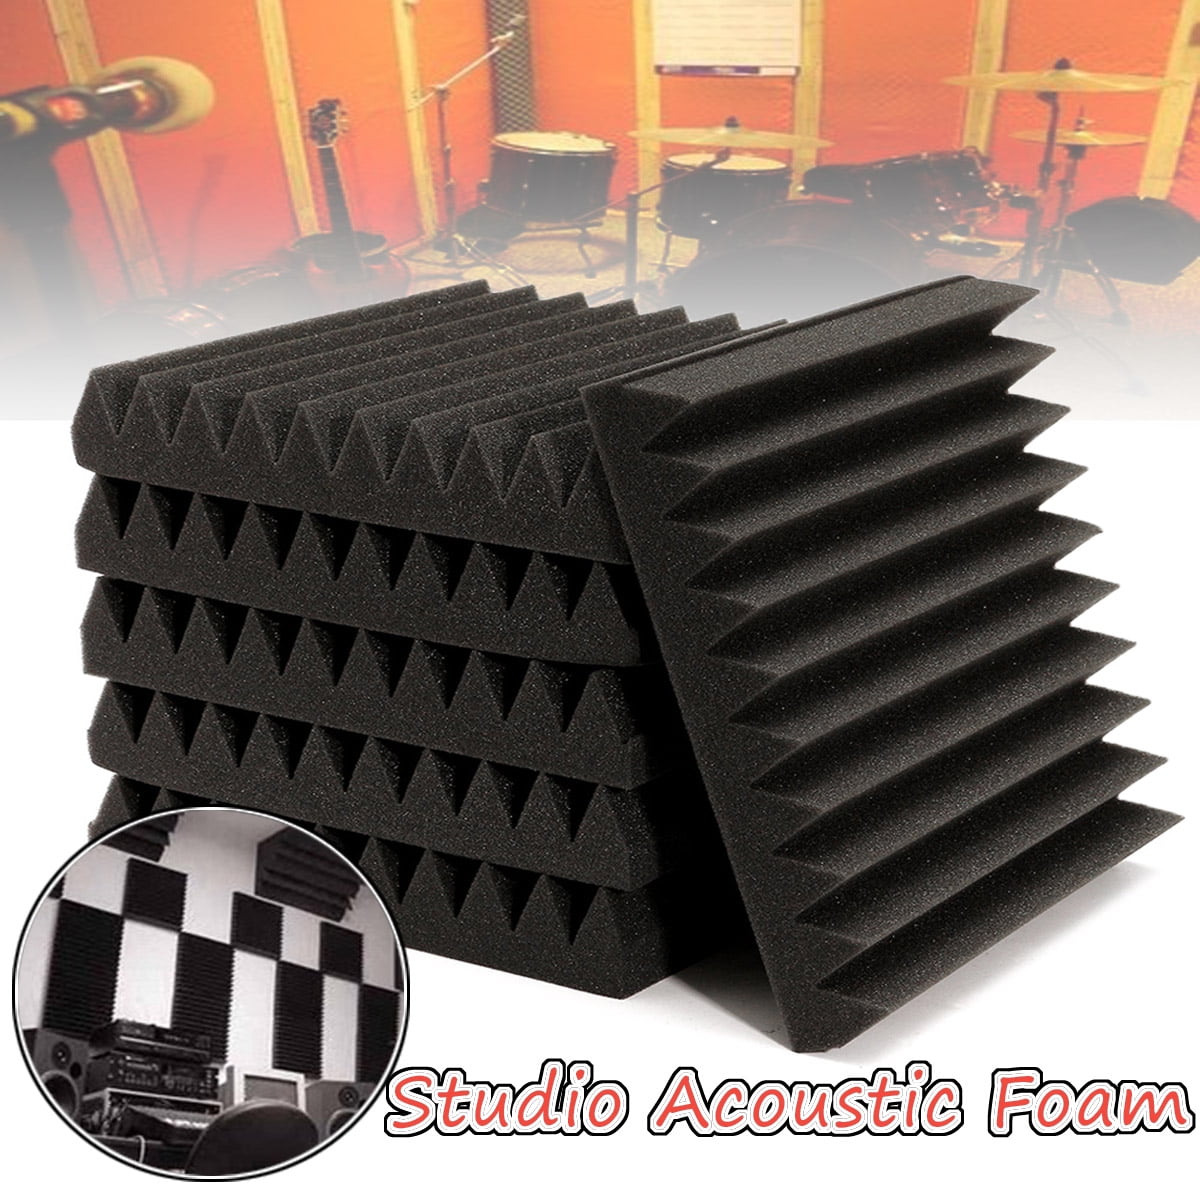 Great for music sound and noise reduction. FOAMENGINEERING 48-Pack Acoustic Panels Studio Soundproofing Foam Wedge tiles 1x12x12 100% Made in USA